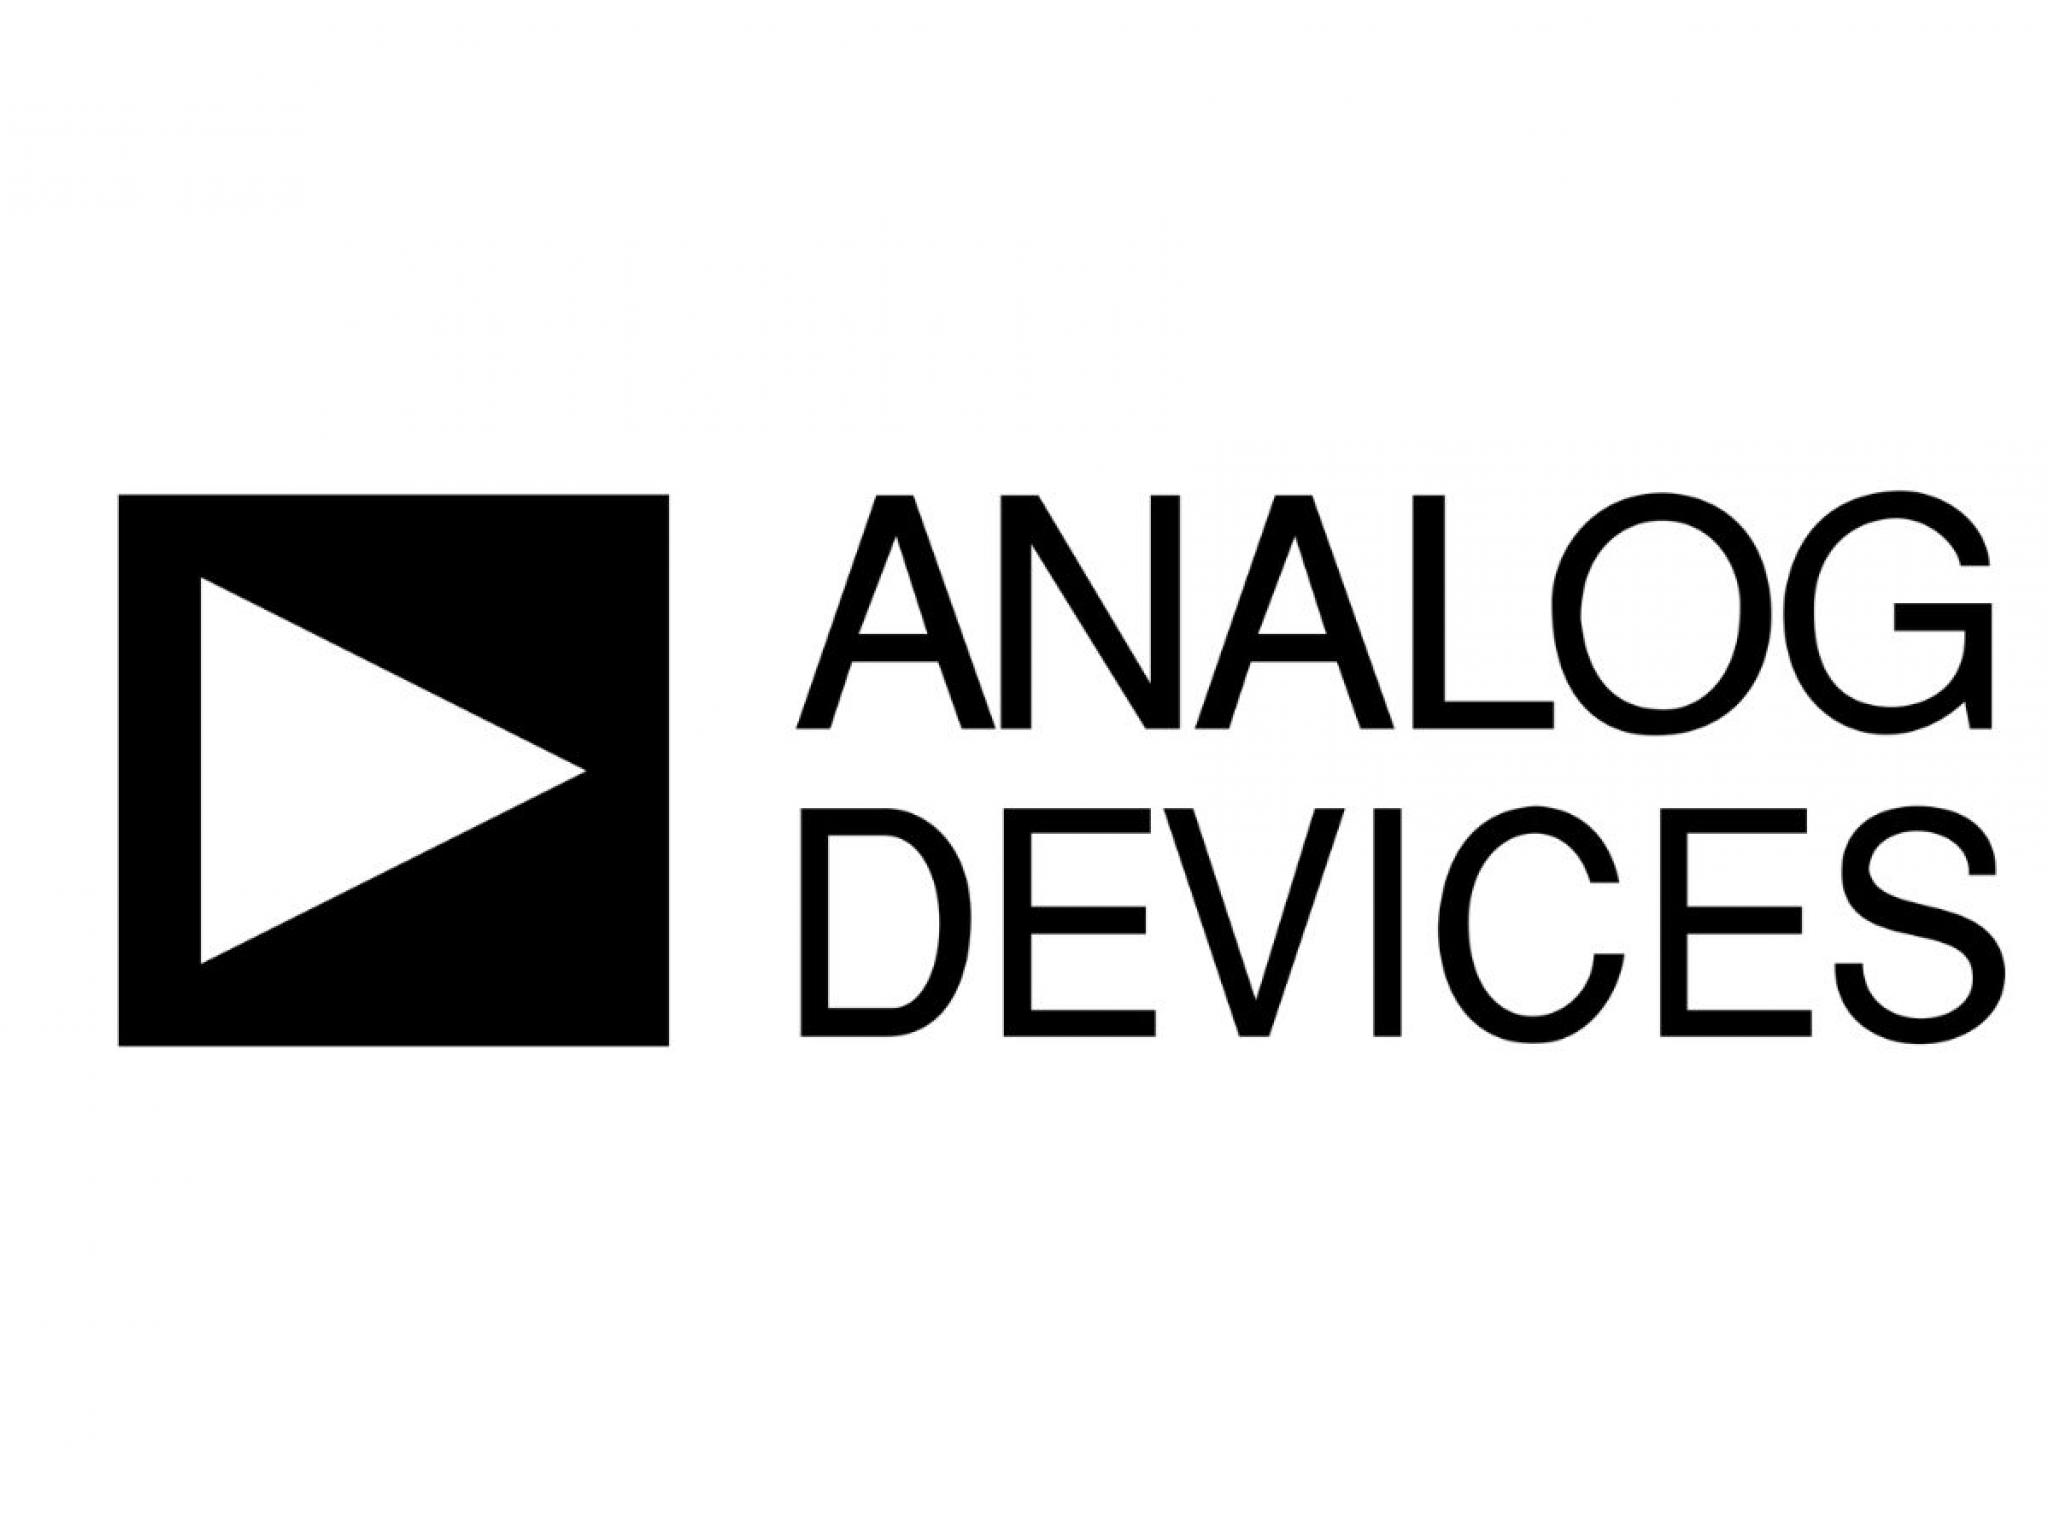  analog-devices-to-rally-around-19-here-are-10-top-analyst-forecasts-for-thursday 